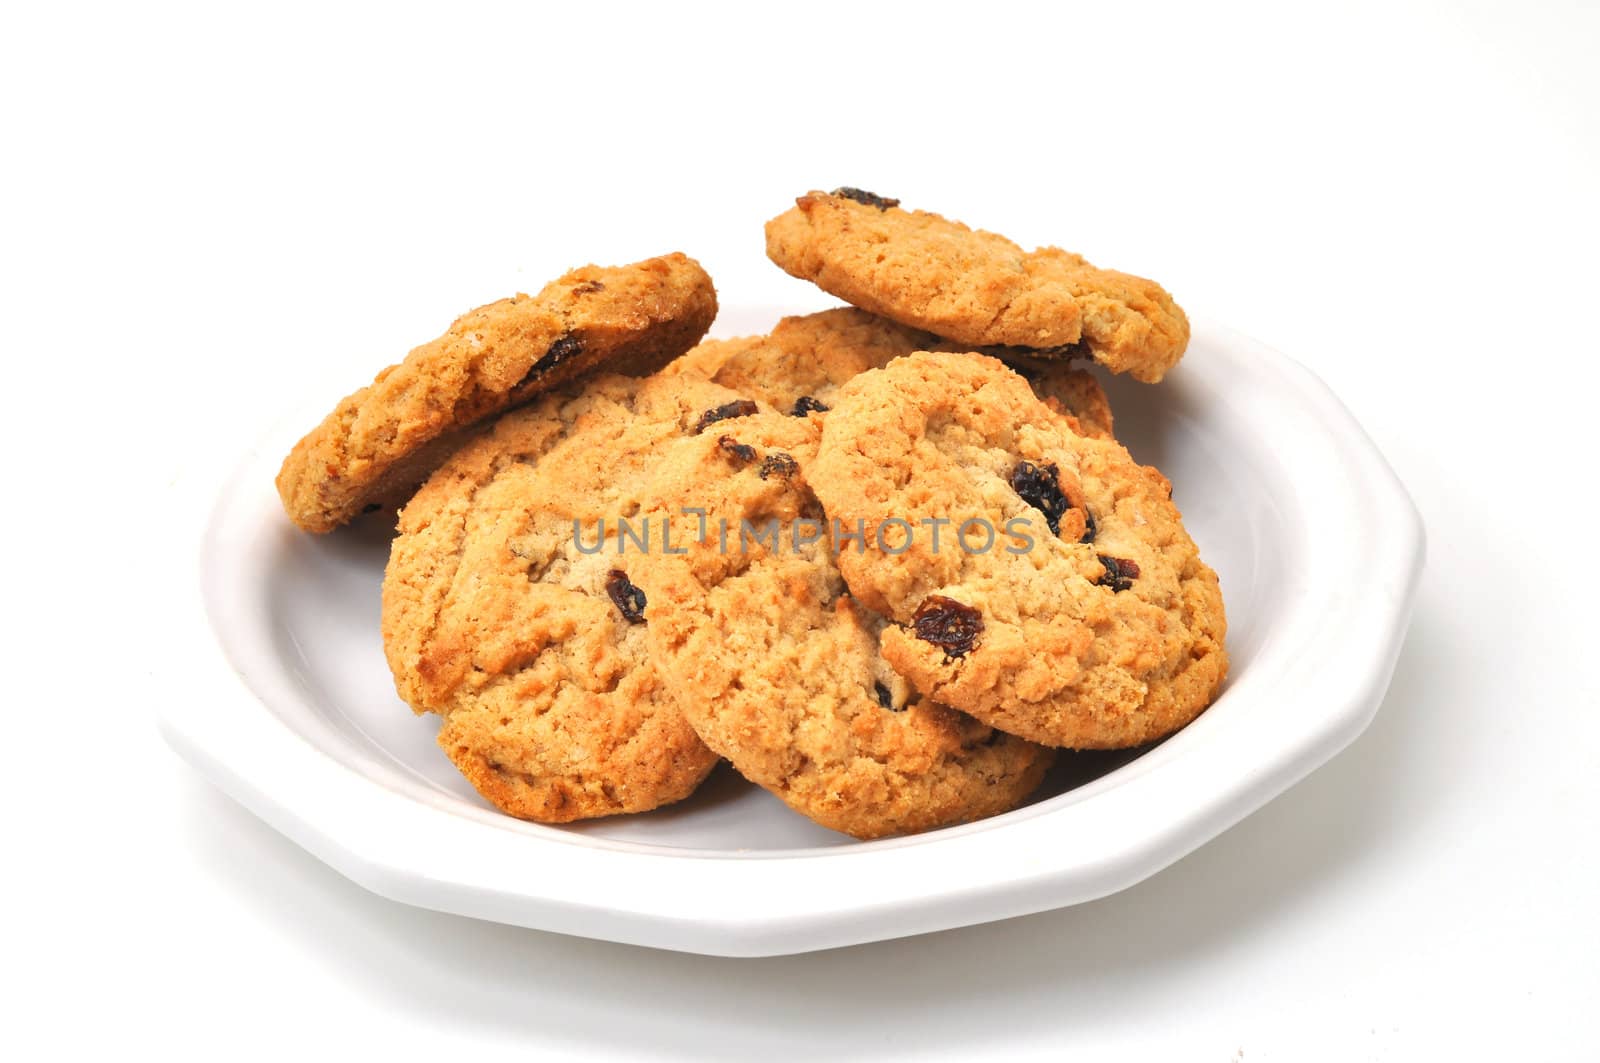 Oatmeal cookies on plate isolated on white background.